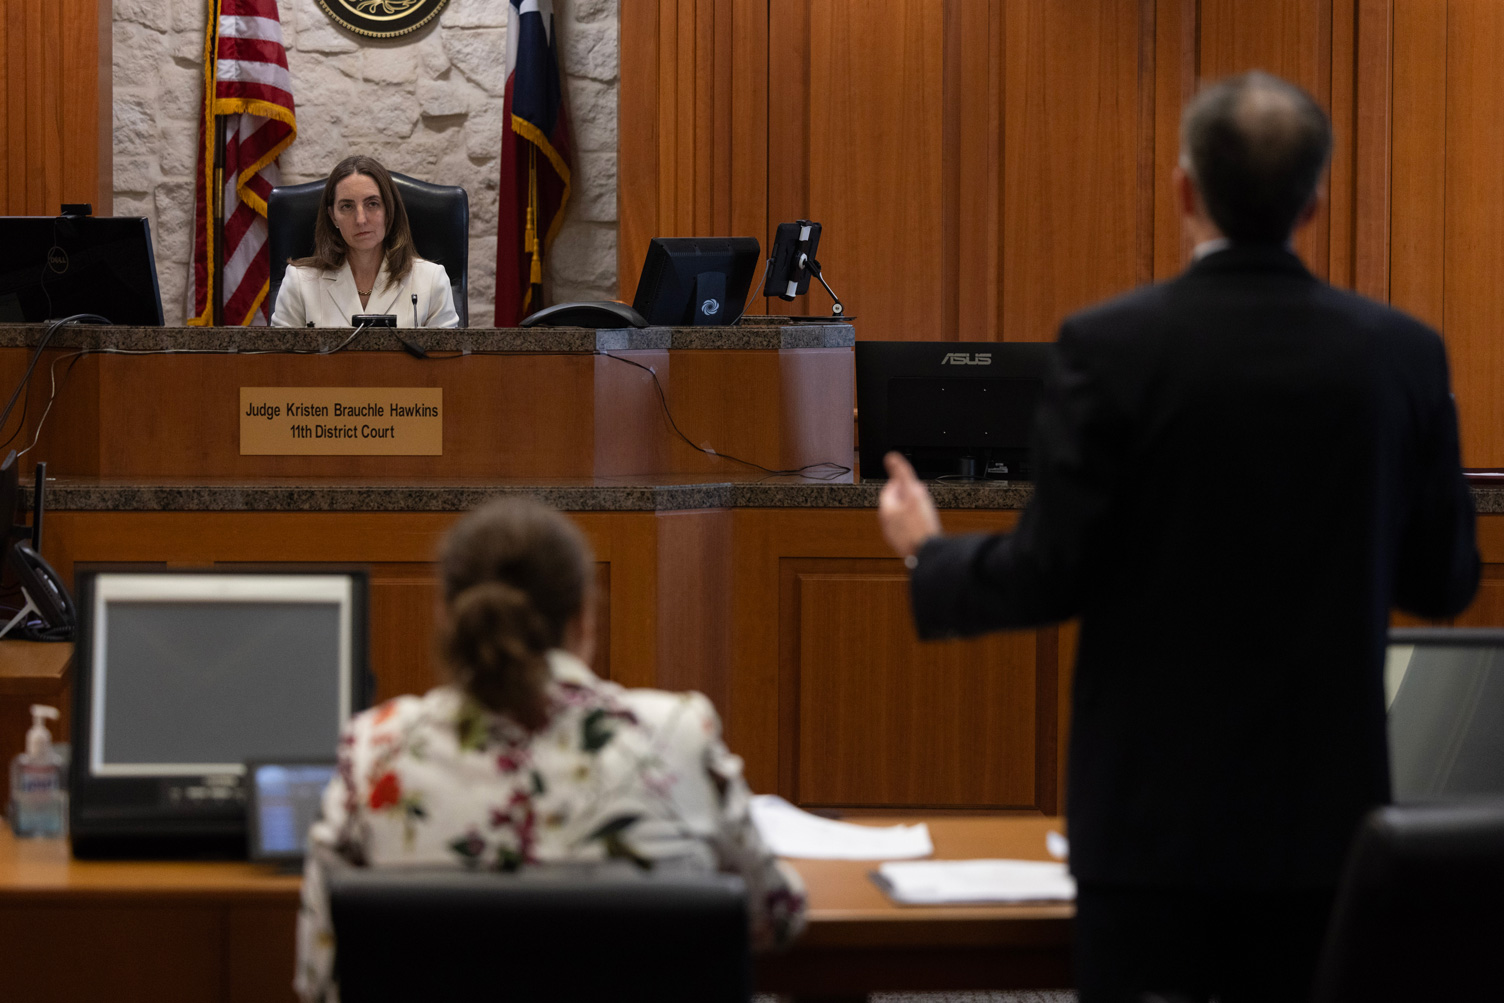 Judge Kristen Brauchle Hawkins, at left, listens to Stephen Brody, lead council for Travis Scott, speak during a pretrial hearing for Astroworld at the Harris County Courthouse, Monday, April 15, 2024, in Houston.